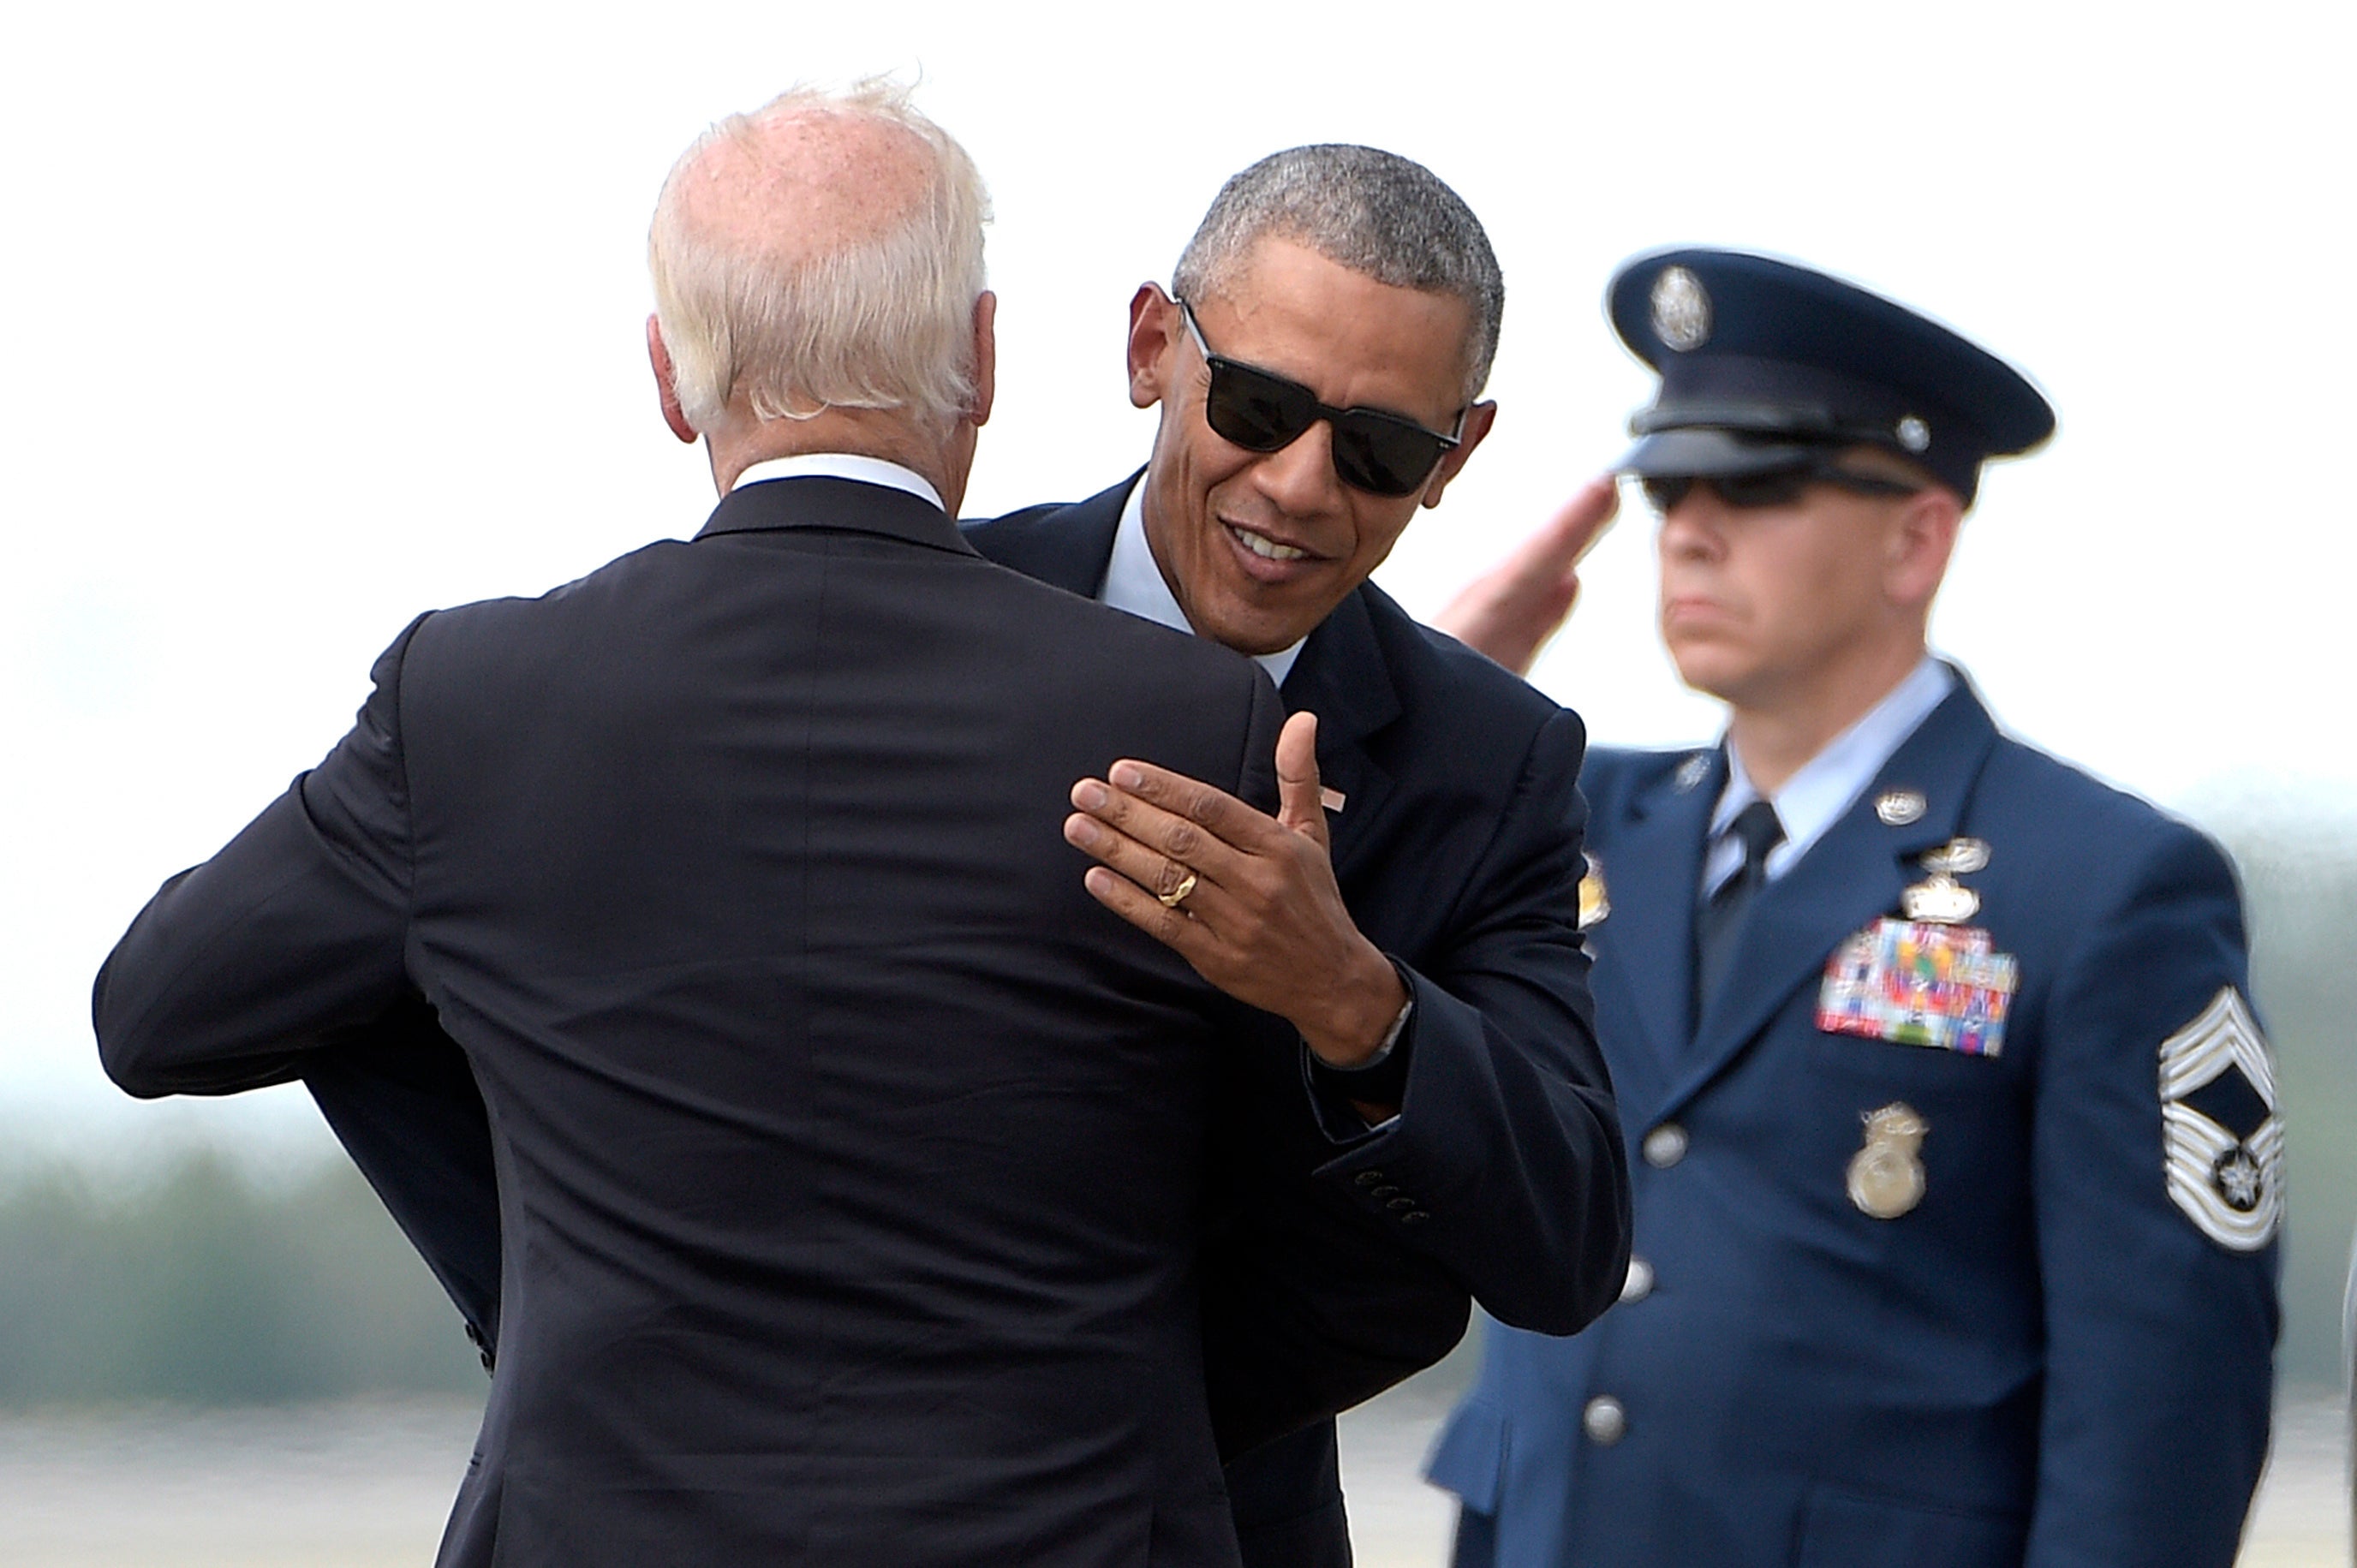 Bromance! 40 Pictures That Prove President Obama And Joe Biden Are #SquadGoals
